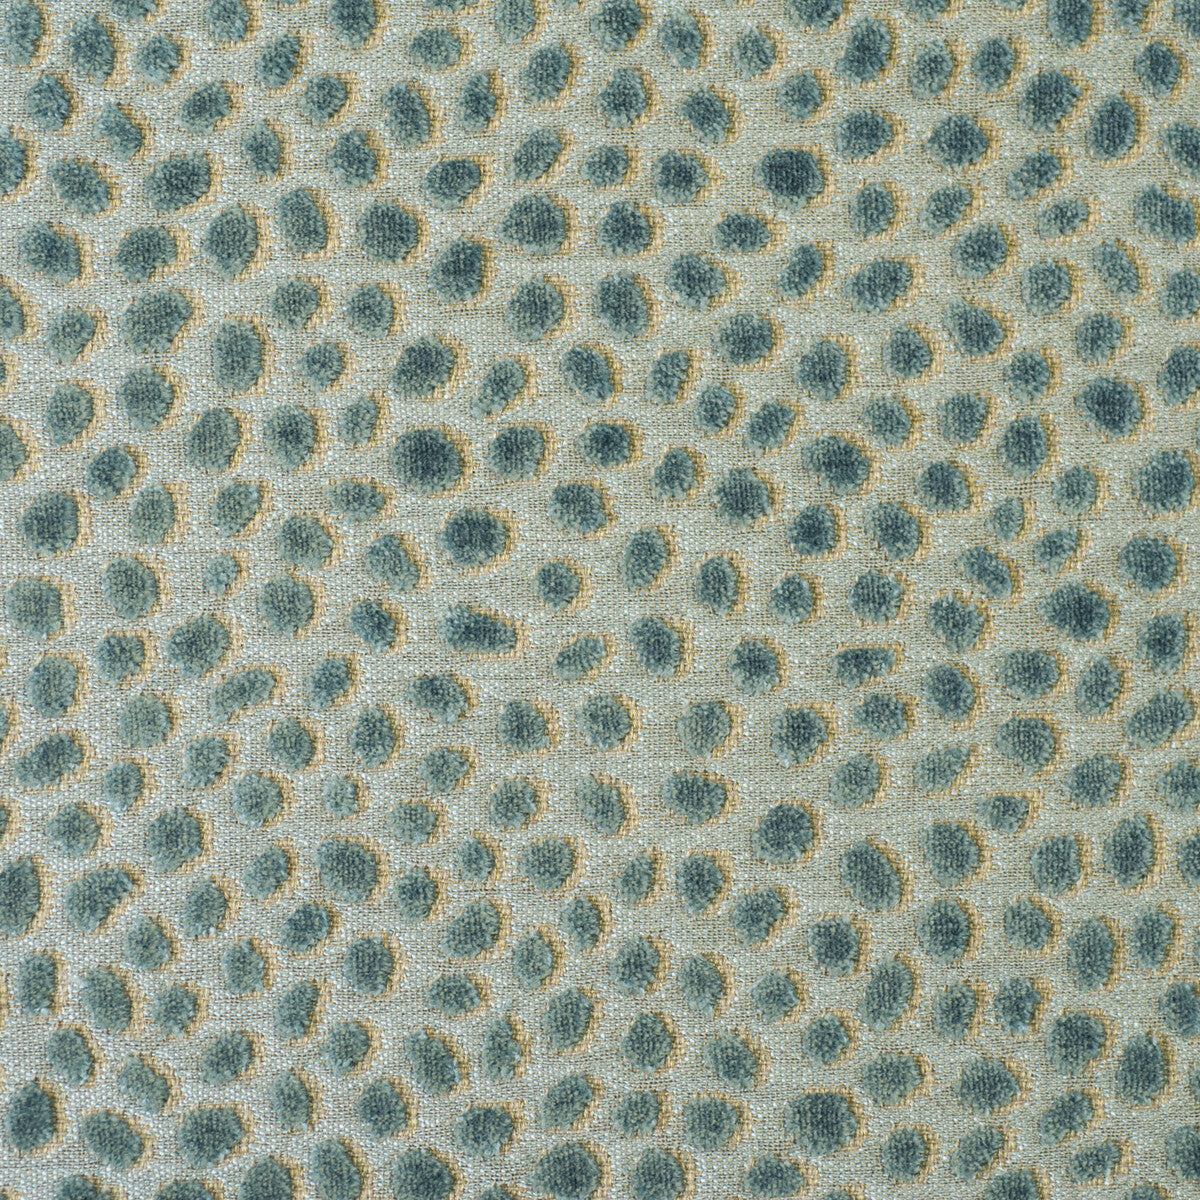 Cosma fabric in teal/aqua color - pattern LB50064.615.0 - by Baker Lifestyle in the Foxwood collection